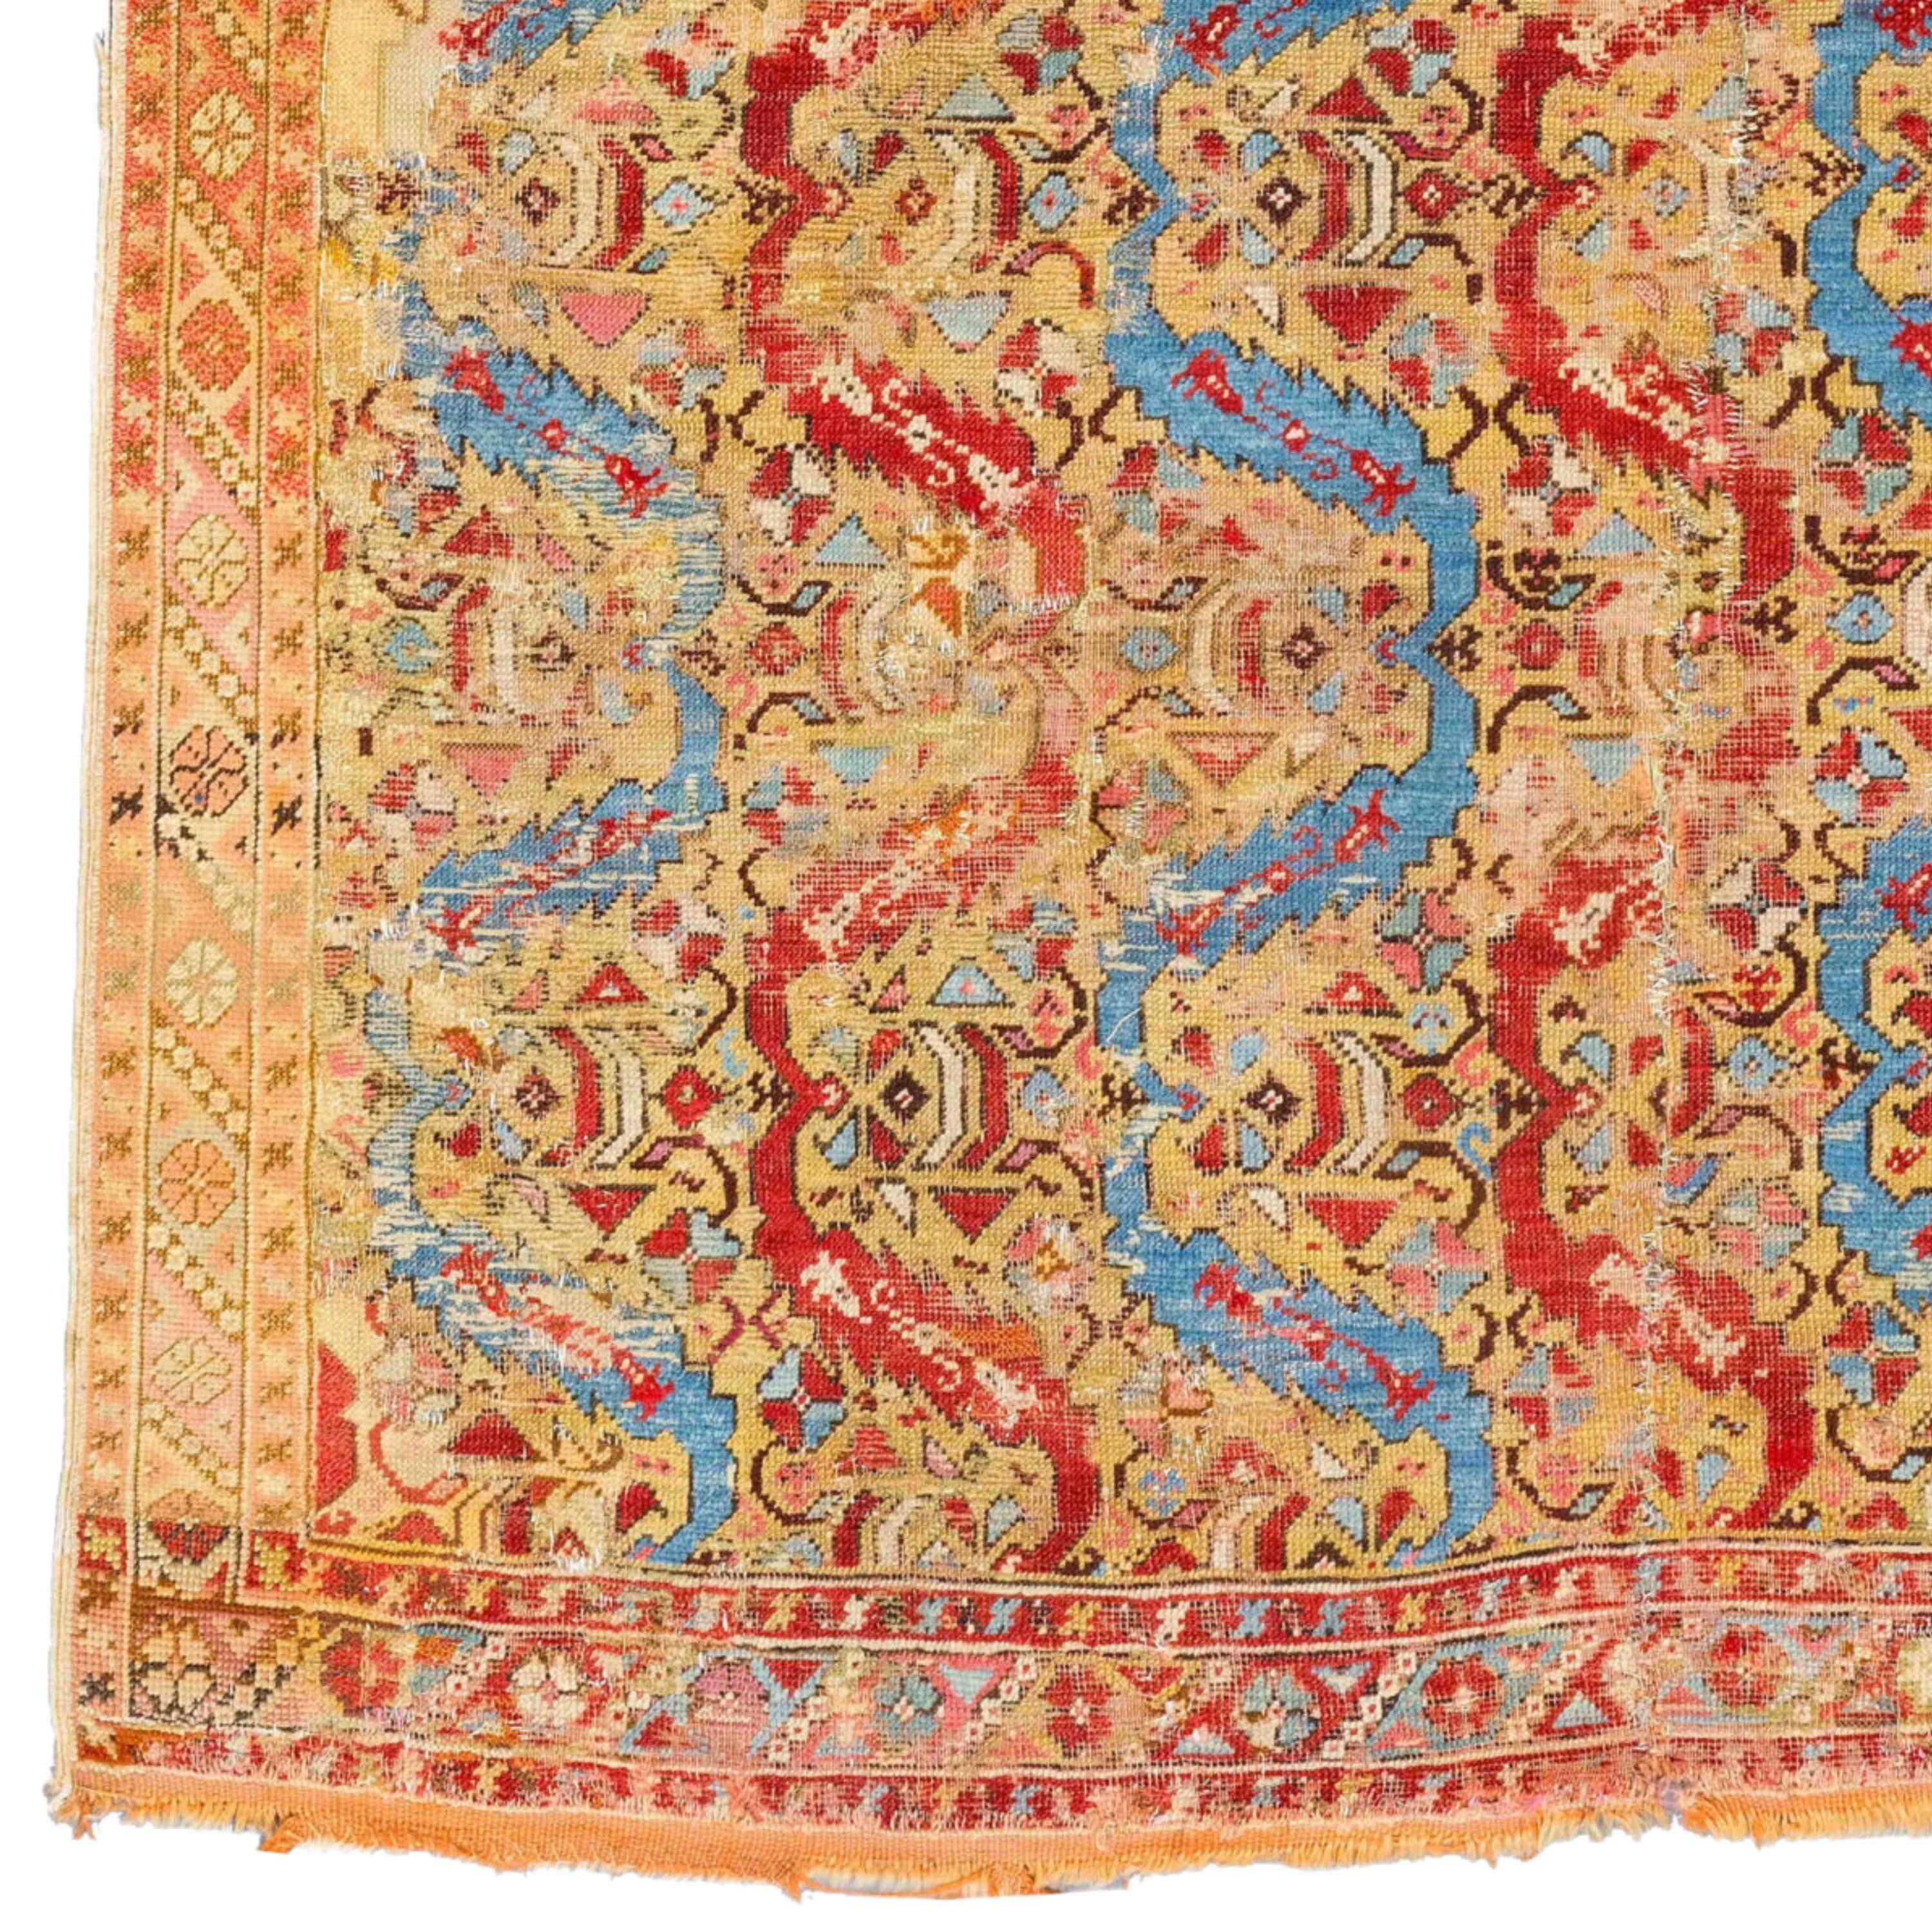 Antique Transylvanian Rug - 17th Century Unusual Design West Anatolia Transylvanian Rug Size 143 x 173 cm (56,2x68,1 In)

The Transylvanian rug, also called the Siebenbürger rug, is one of many floor coverings found in churches in Transylvania (part